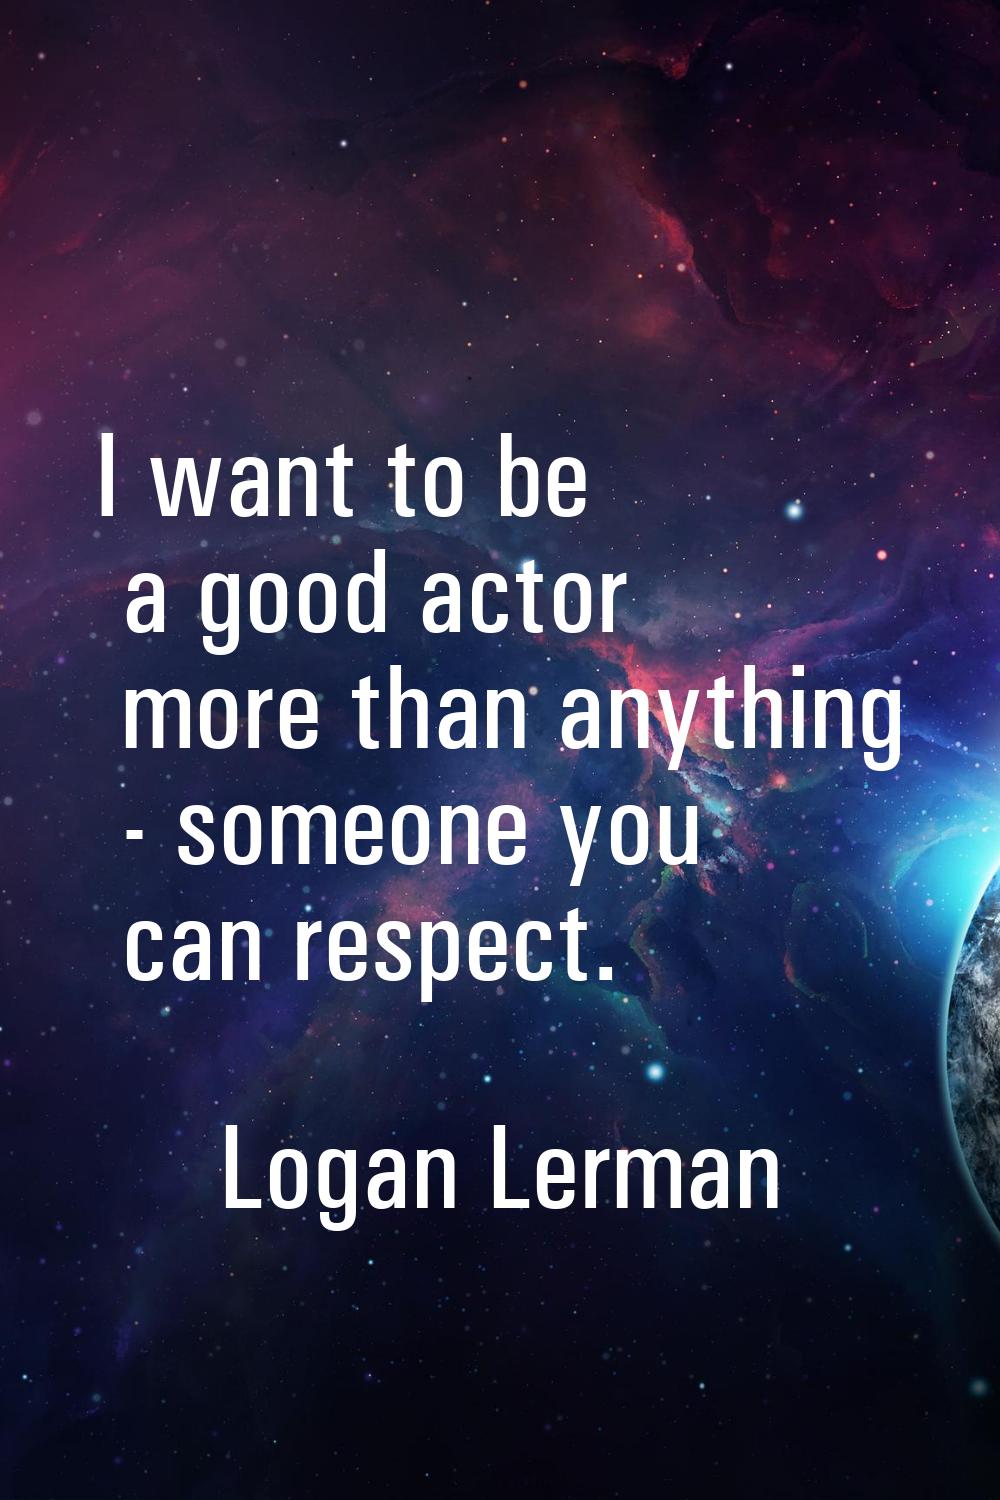 I want to be a good actor more than anything - someone you can respect.